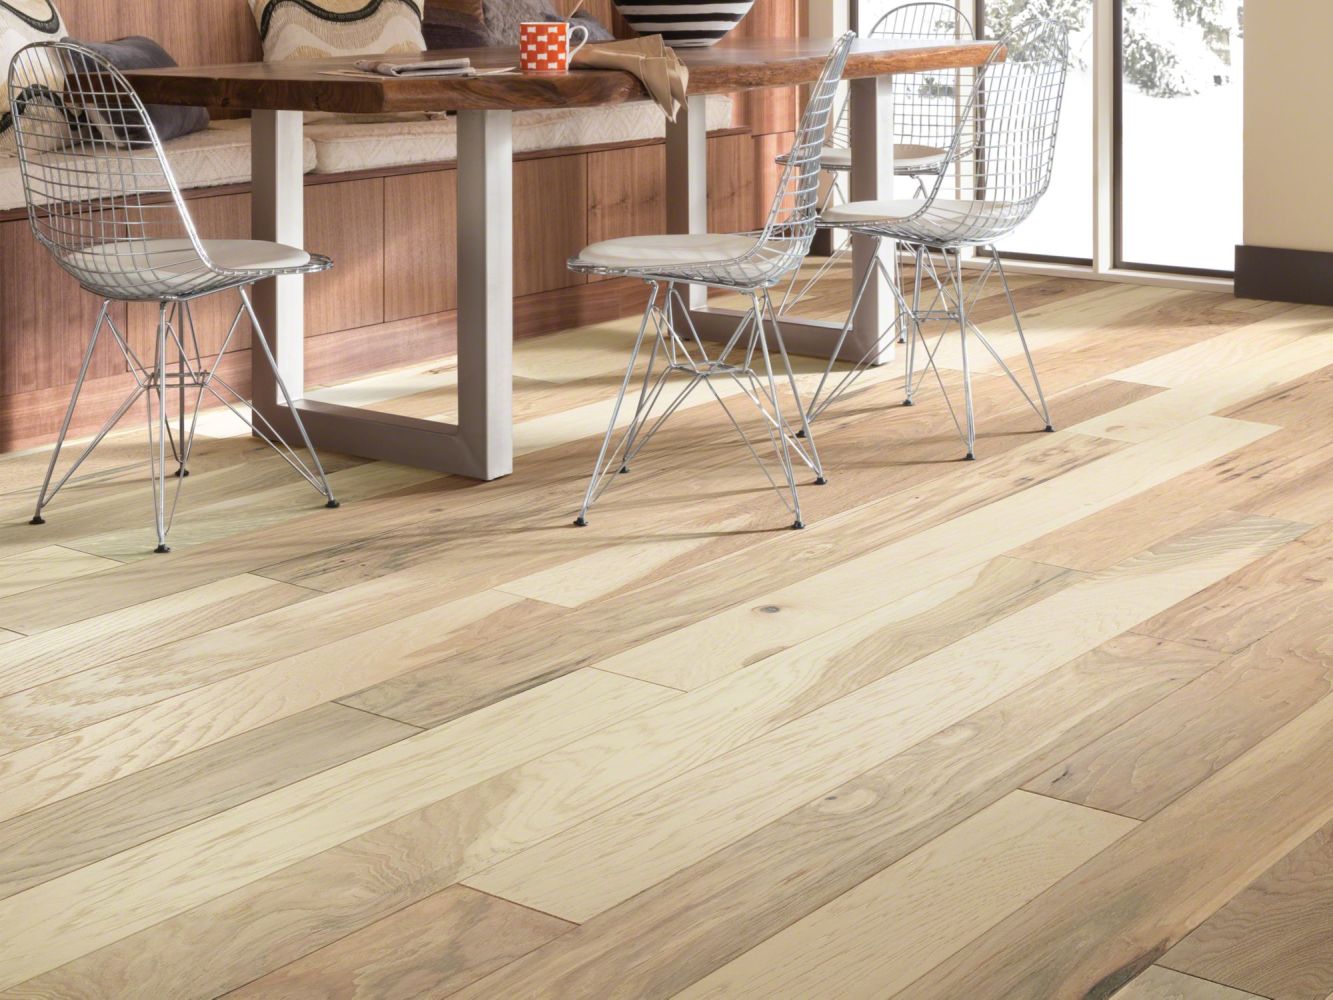 Shaw Floors Home Fn Gold Hardwood Campbell Creek Brushed Canopy 01032_HW670